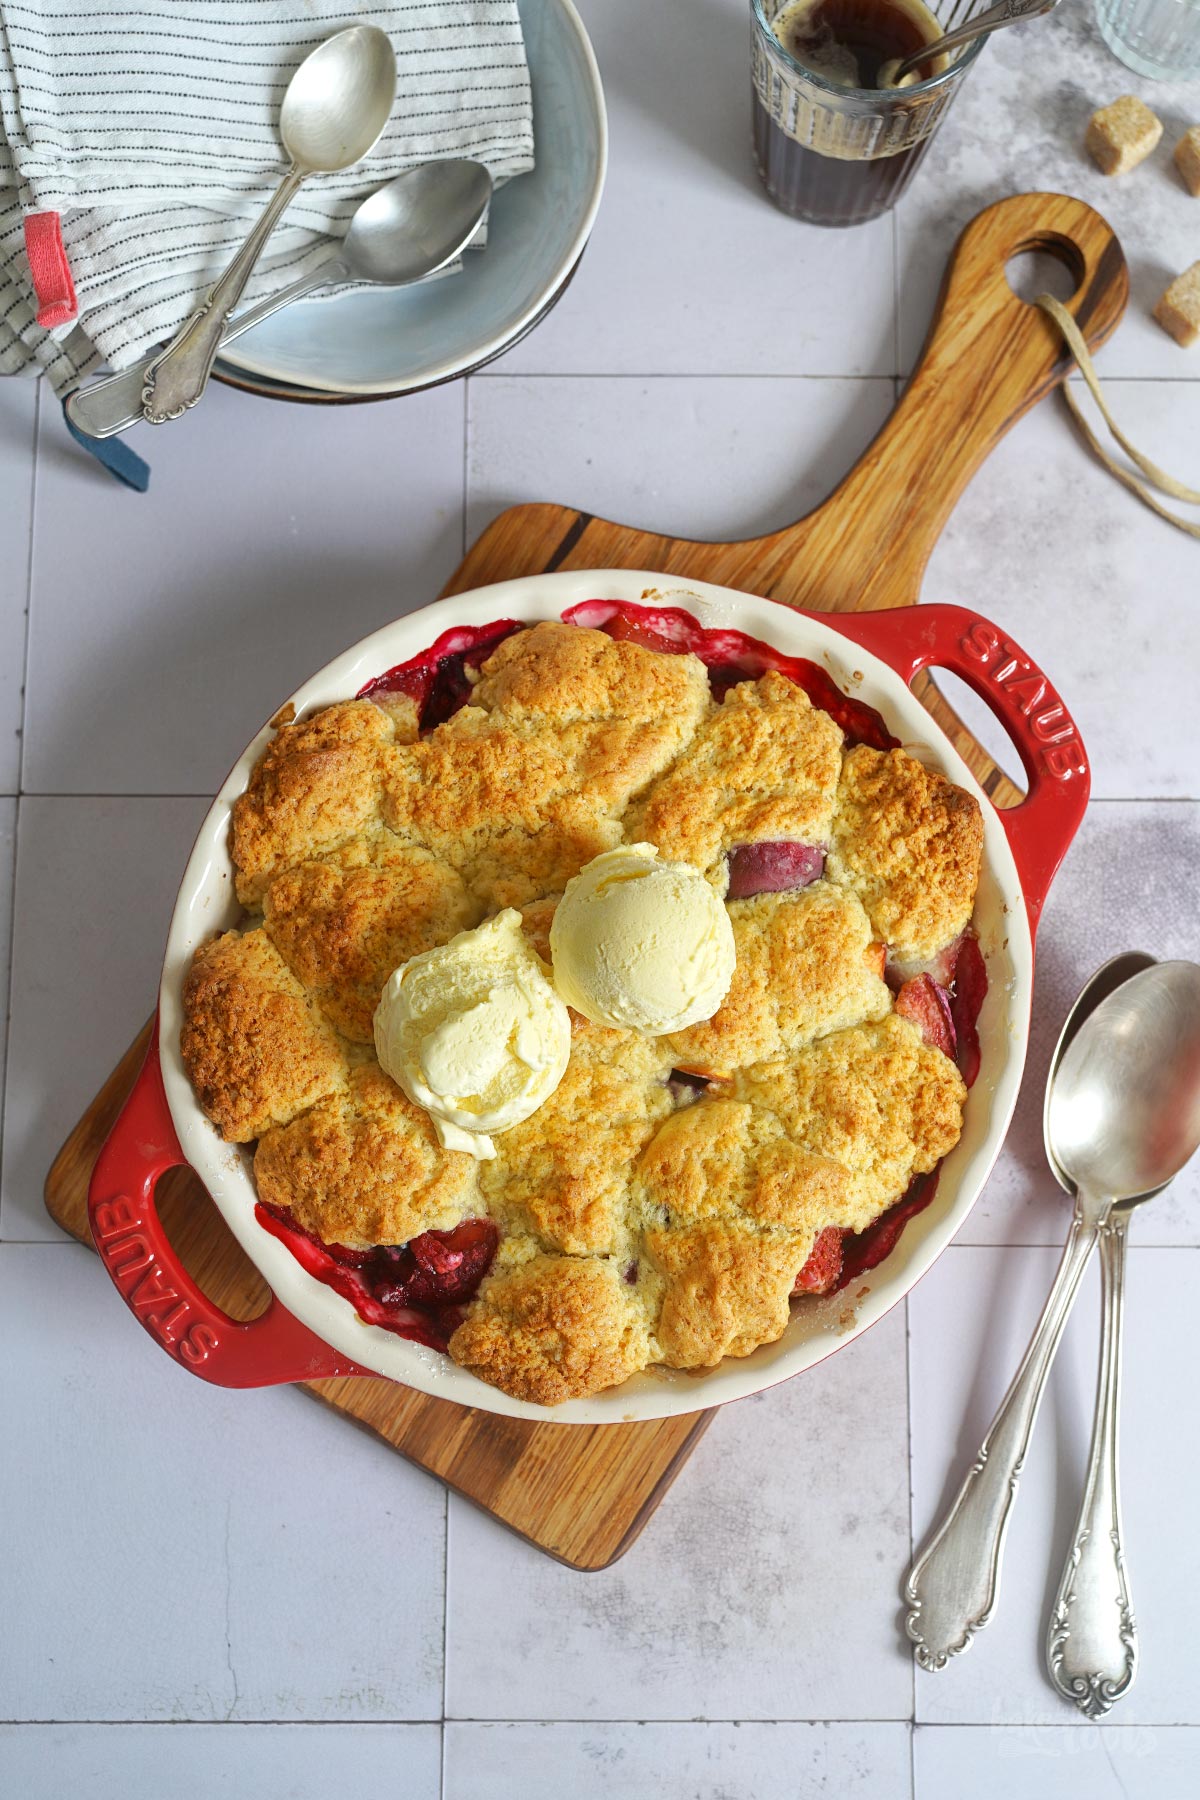 Peach 'n' Berries Summer Cobbler | Bake to the roots